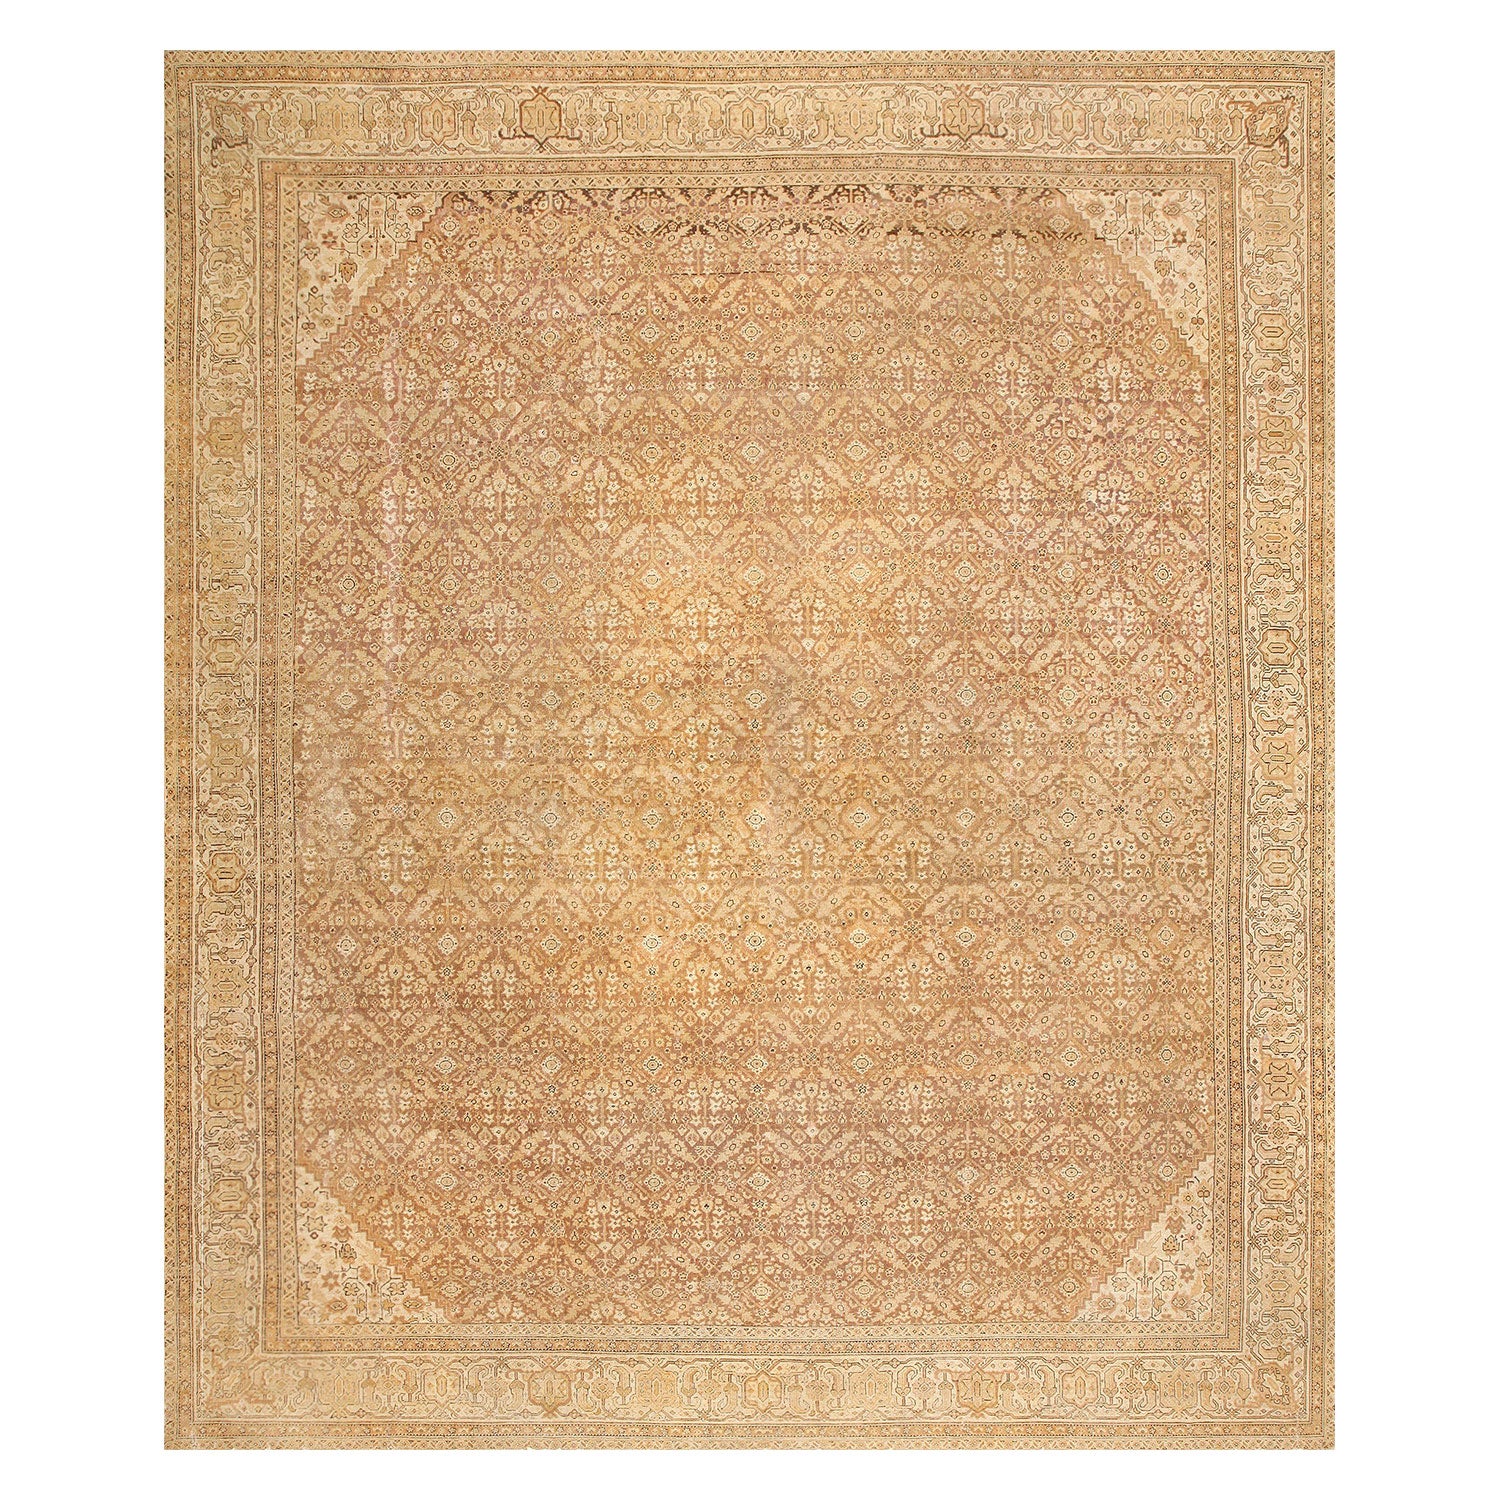 An intricately patterned, handmade rug showcases symmetrical diamond and floral motifs in muted tones.